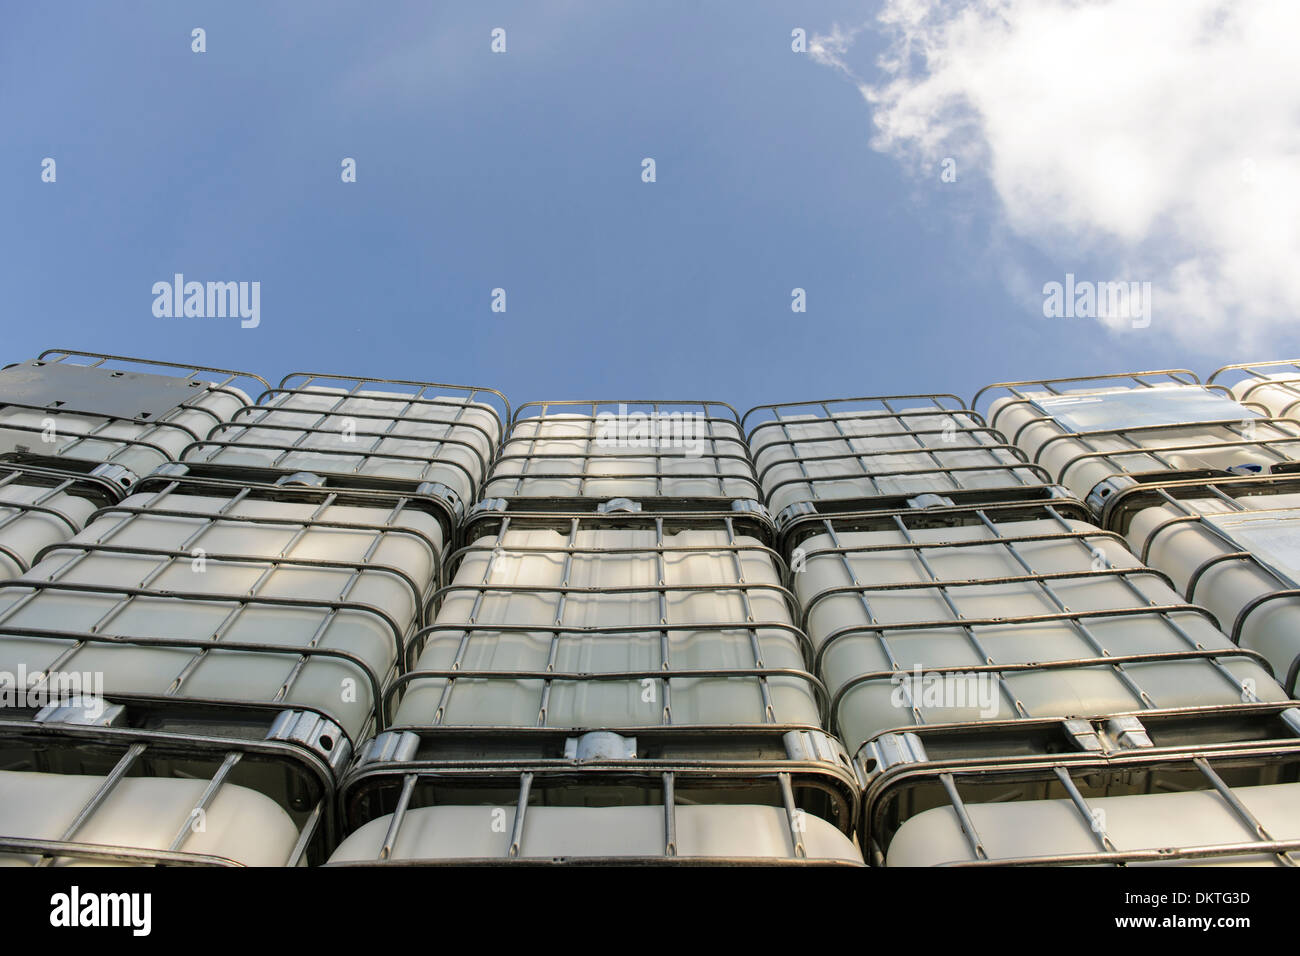 Huge piled water containers, resources, Hamburg, Germany Stock Photo